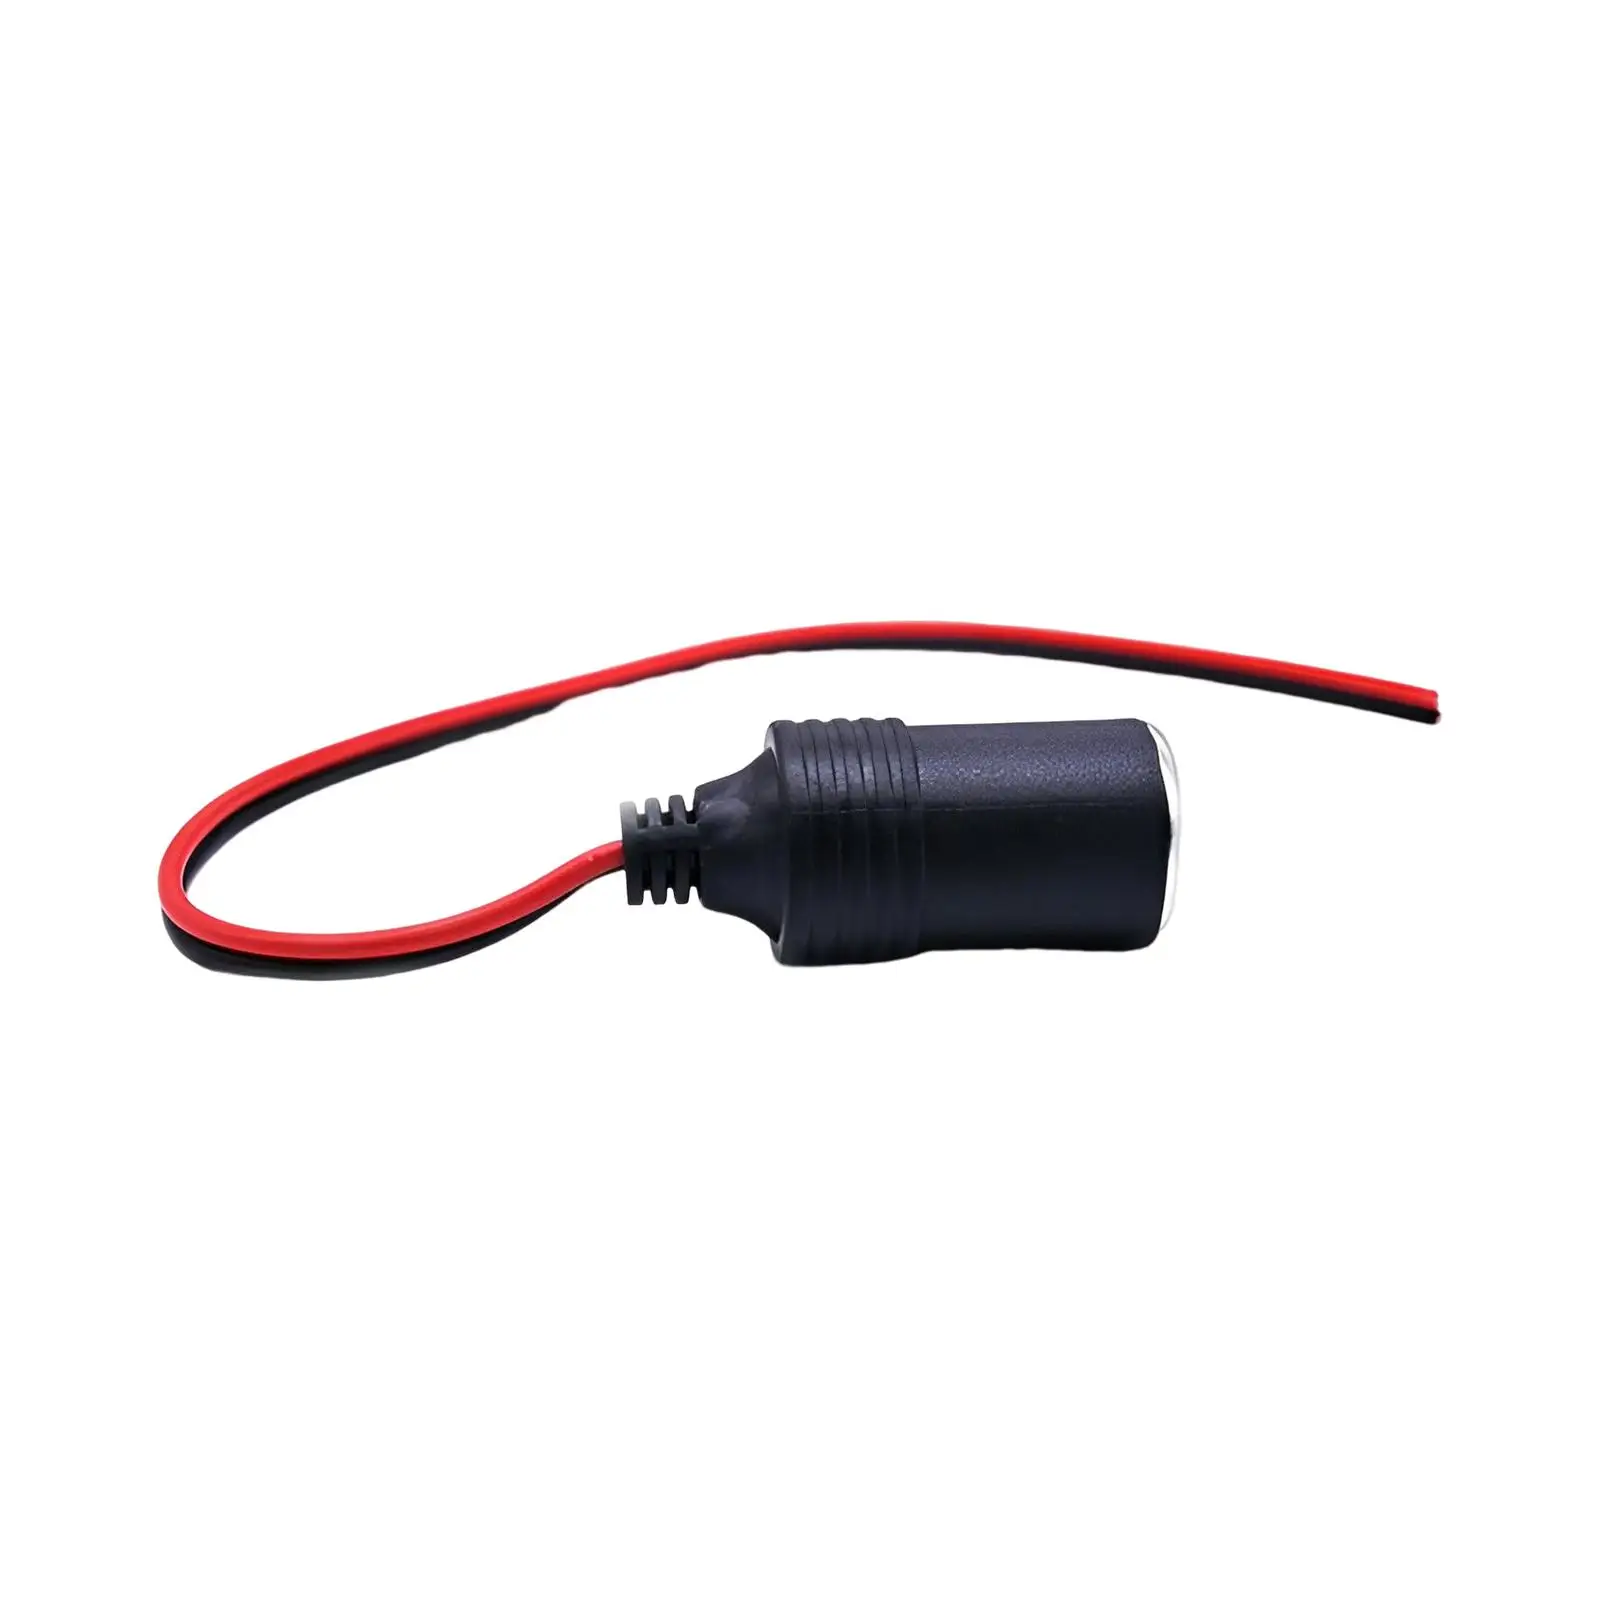 Universal Car Power Cigarette Lighter Female Adapter Cable Plug/ Replace 12V 24V 120W High Current 10A Max/